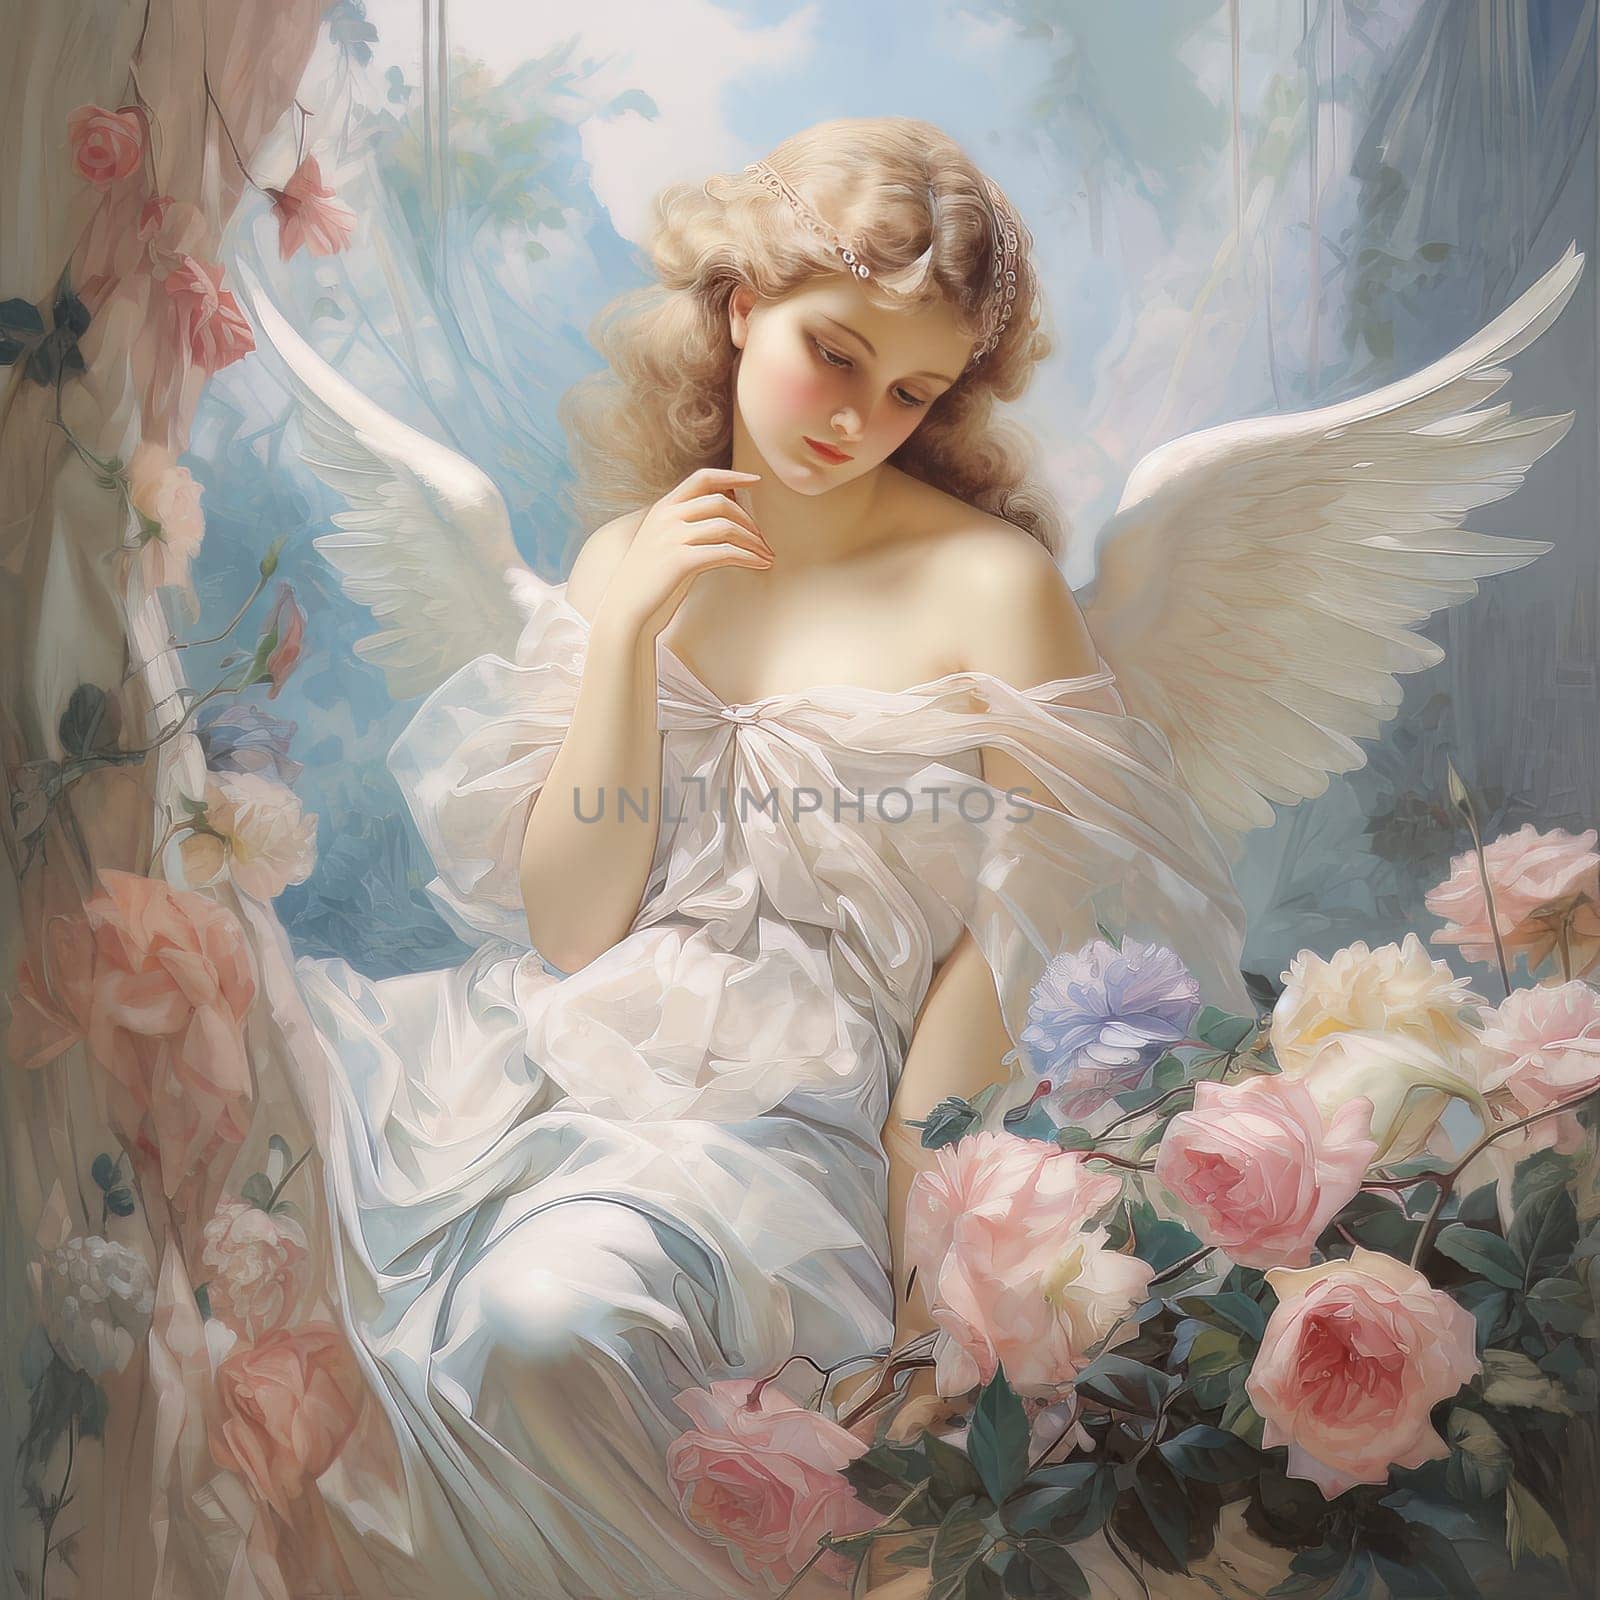 Cute angelic girl with wings and bare shoulders in light summer white dress sits on branch among luxurious rose flowers in the Garden of Eden, pure and immaculate female beauty AI